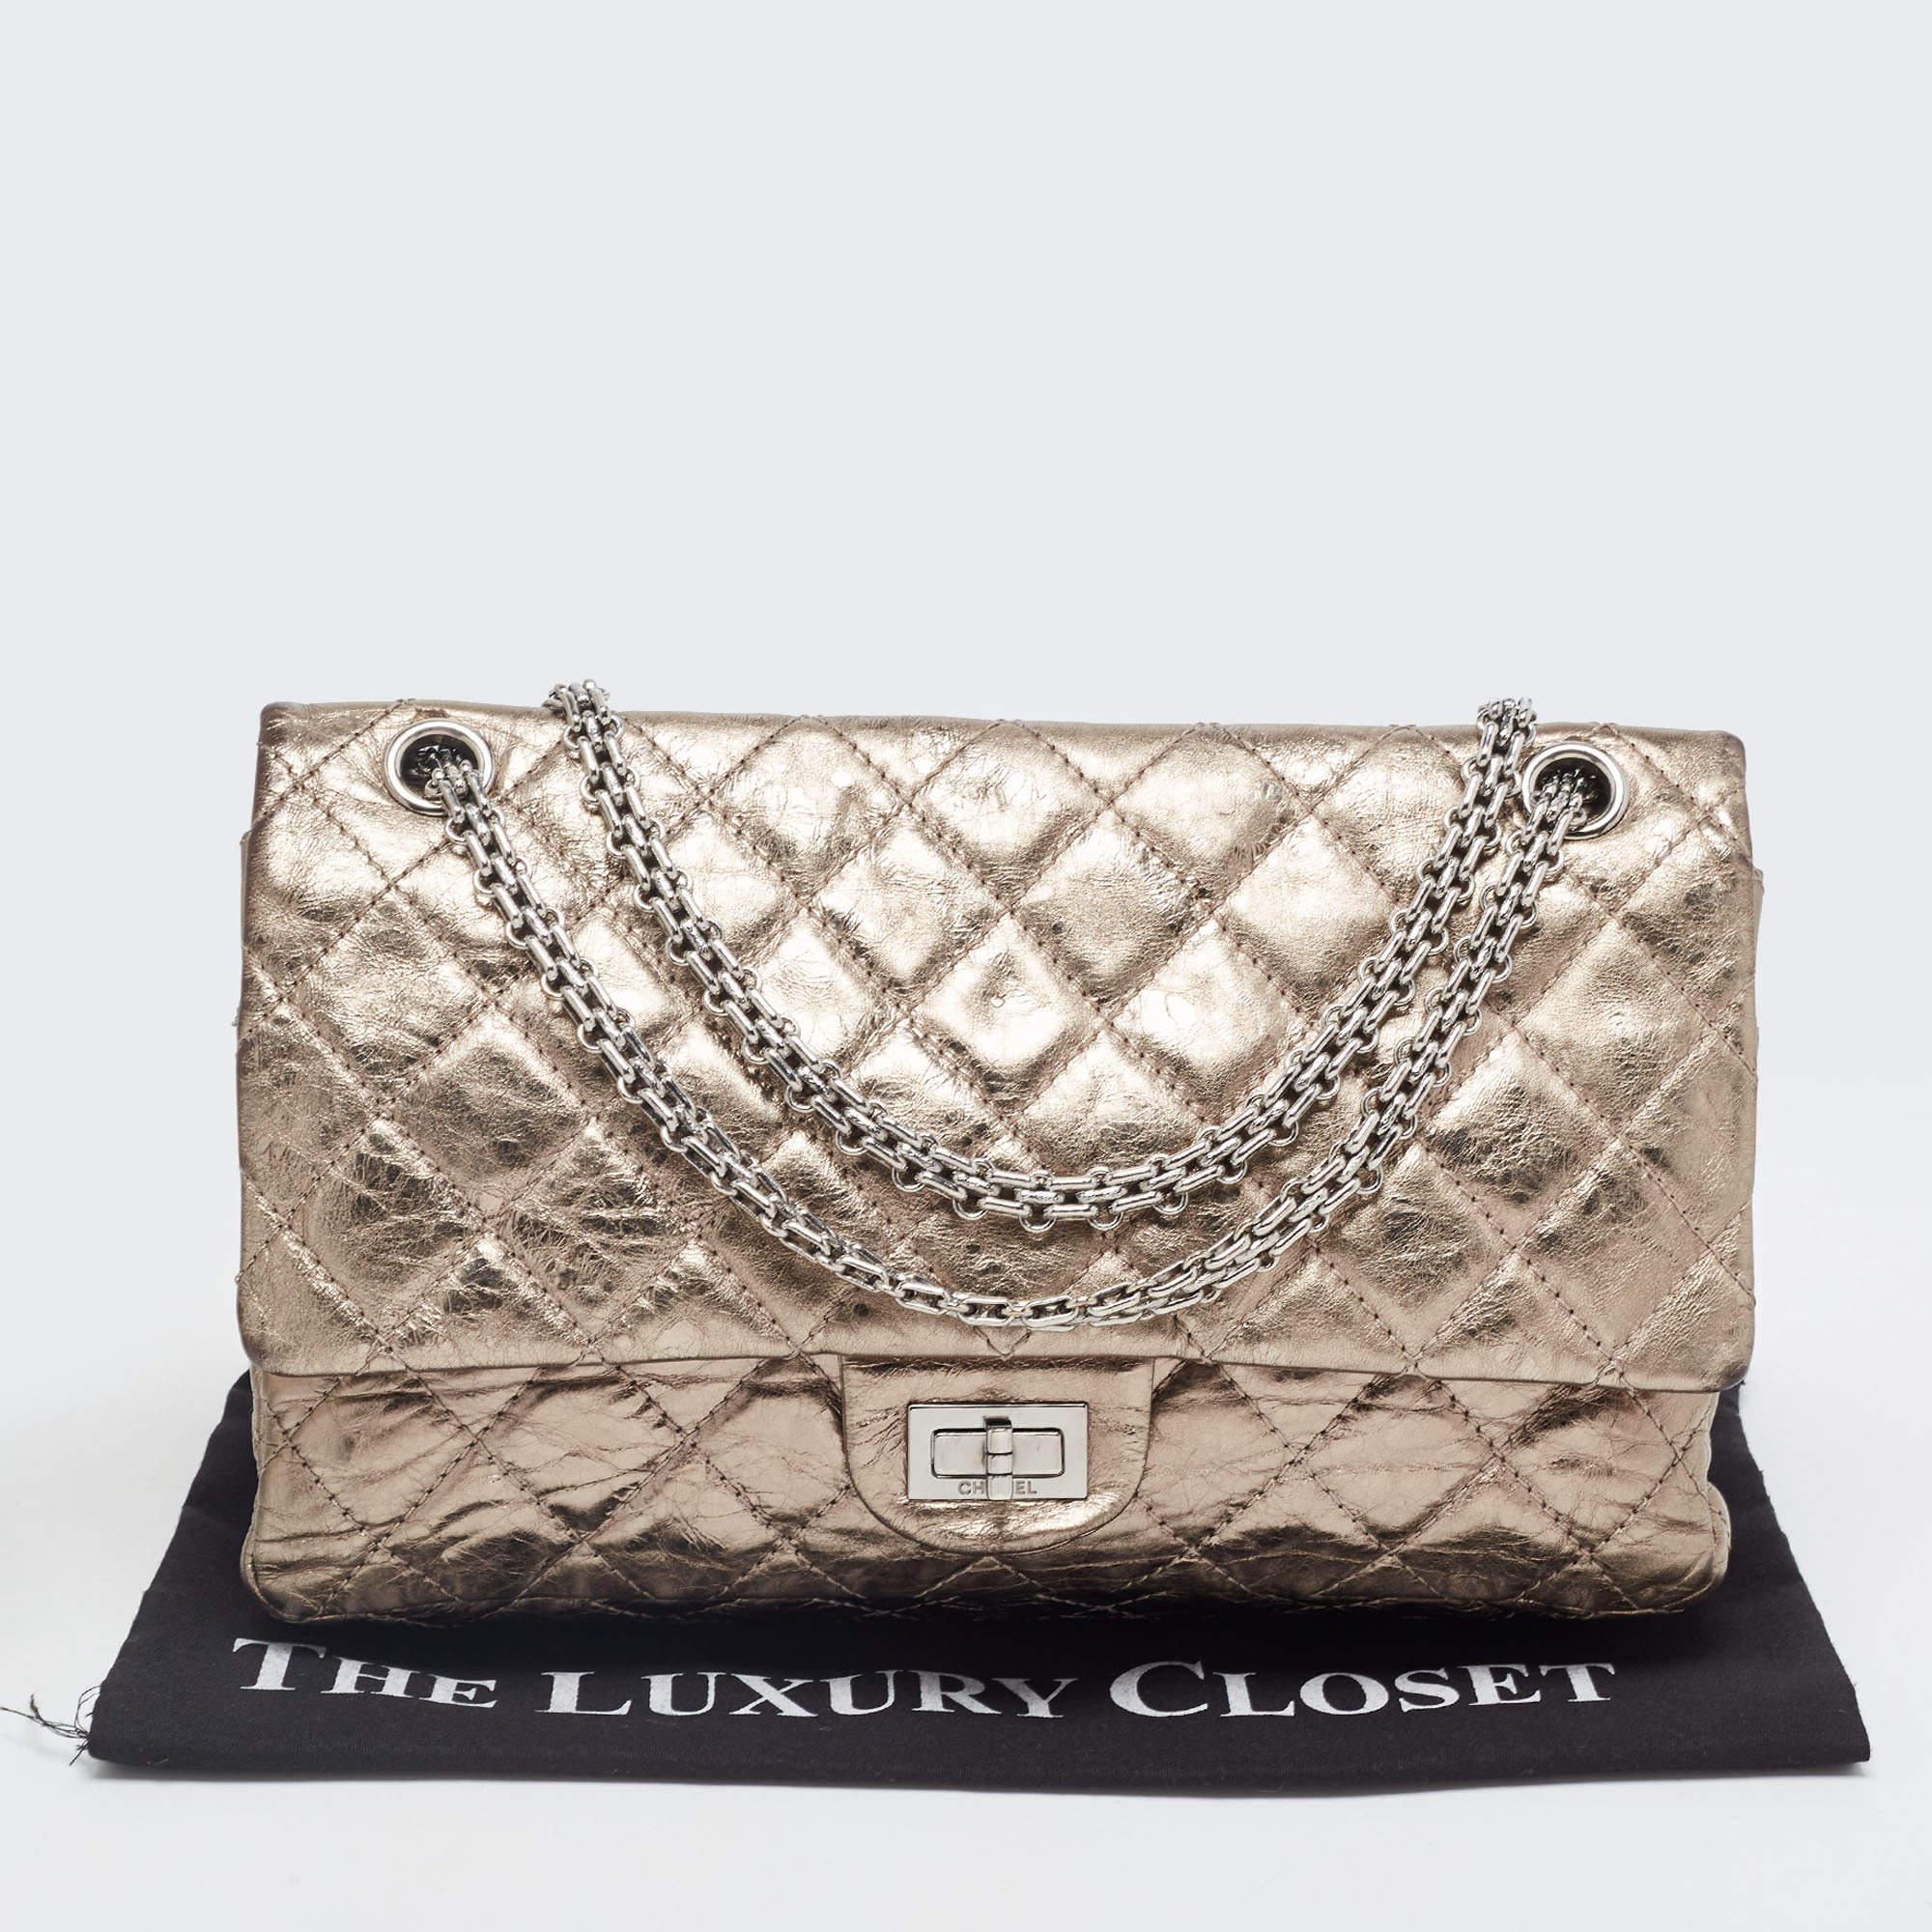 Chanel Metallic Quilted Aged Leather Reissue 2.55 Classic 226 Flap Bag For Sale 6